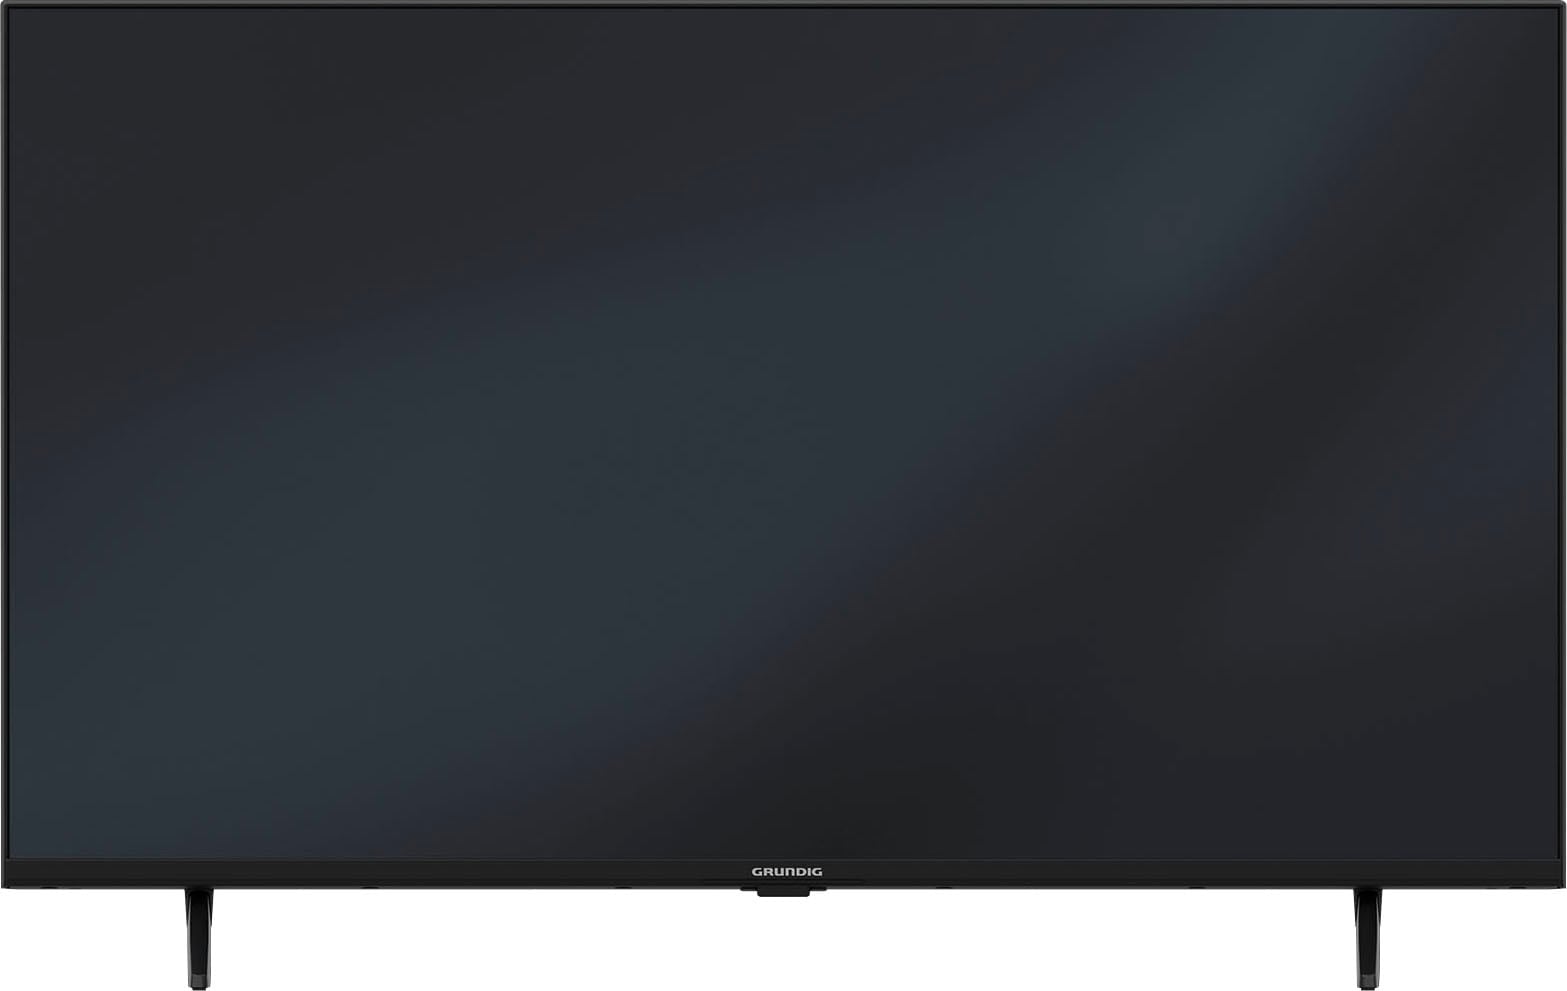 Grundig LED-Fernseher »32 VOE 631 BR2T00«, 80 cm/32 Zoll, HD ready, Android TV-Smart-TV